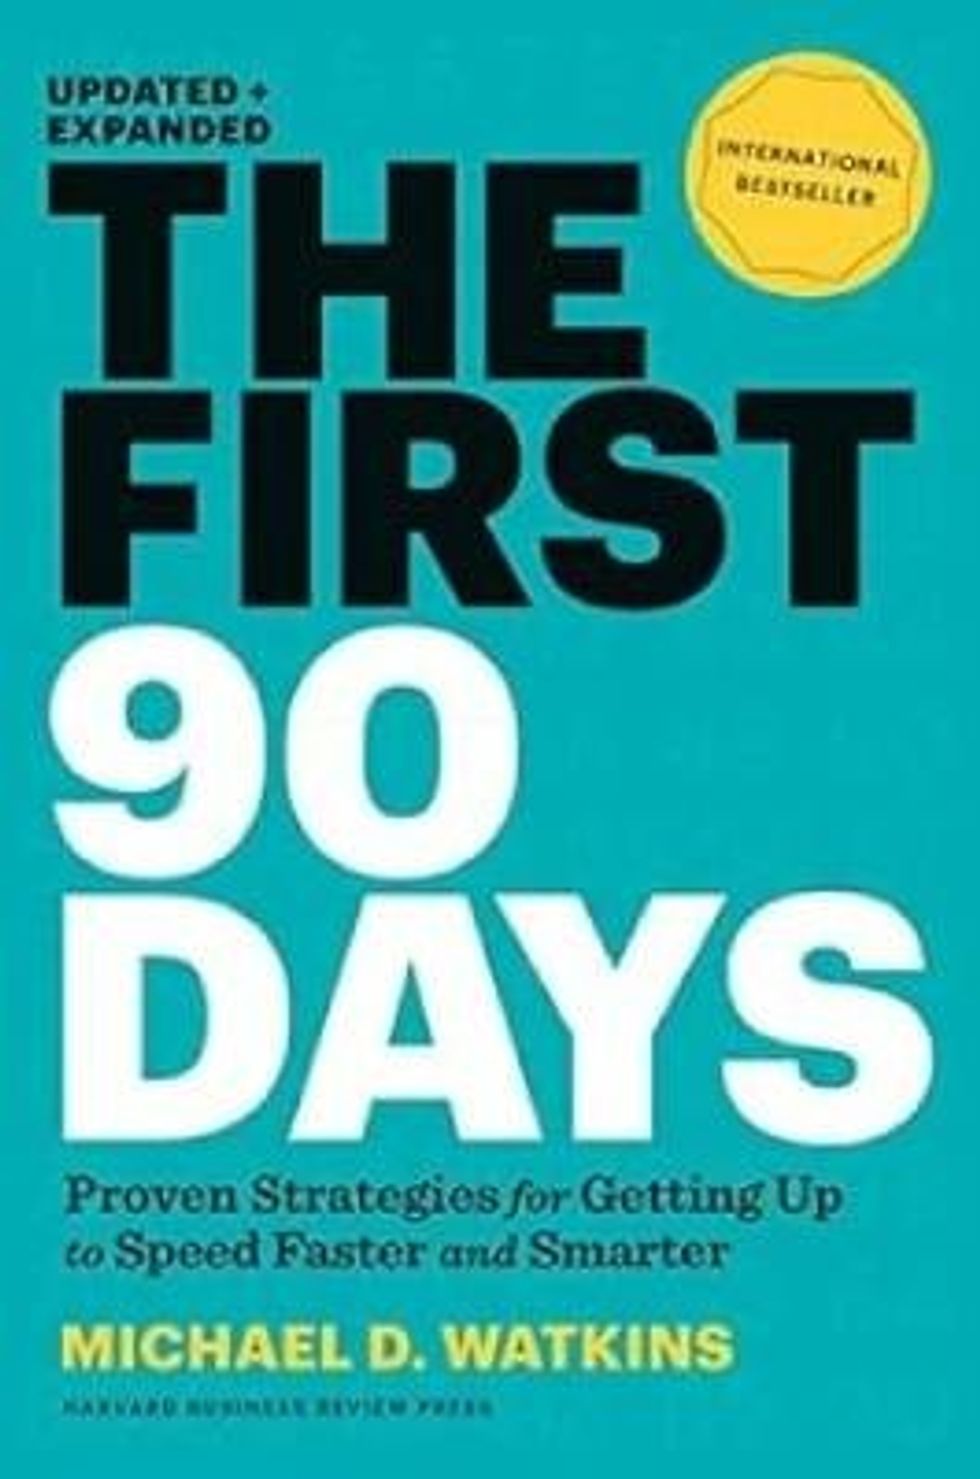 The front cover of the book "The First 90 Days, Updated and Expanded: Proven Strategies for Getting Up to Speed Faster and Smarter" by Michael D. Watkins